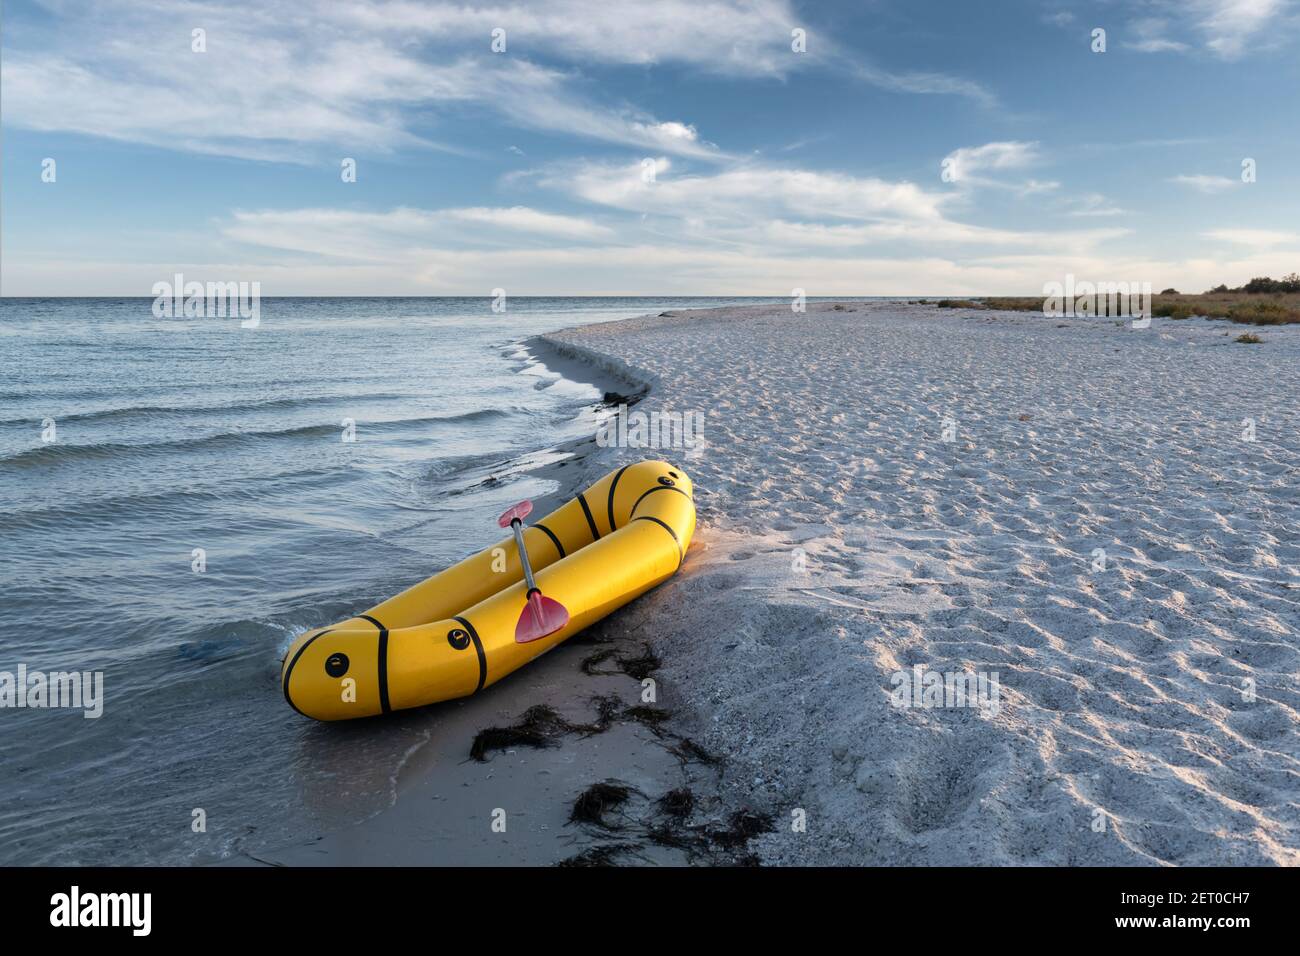 Yellow packraft rubber boat with red padle on a sea coast. Packrafting. Active lifestile concept Stock Photo